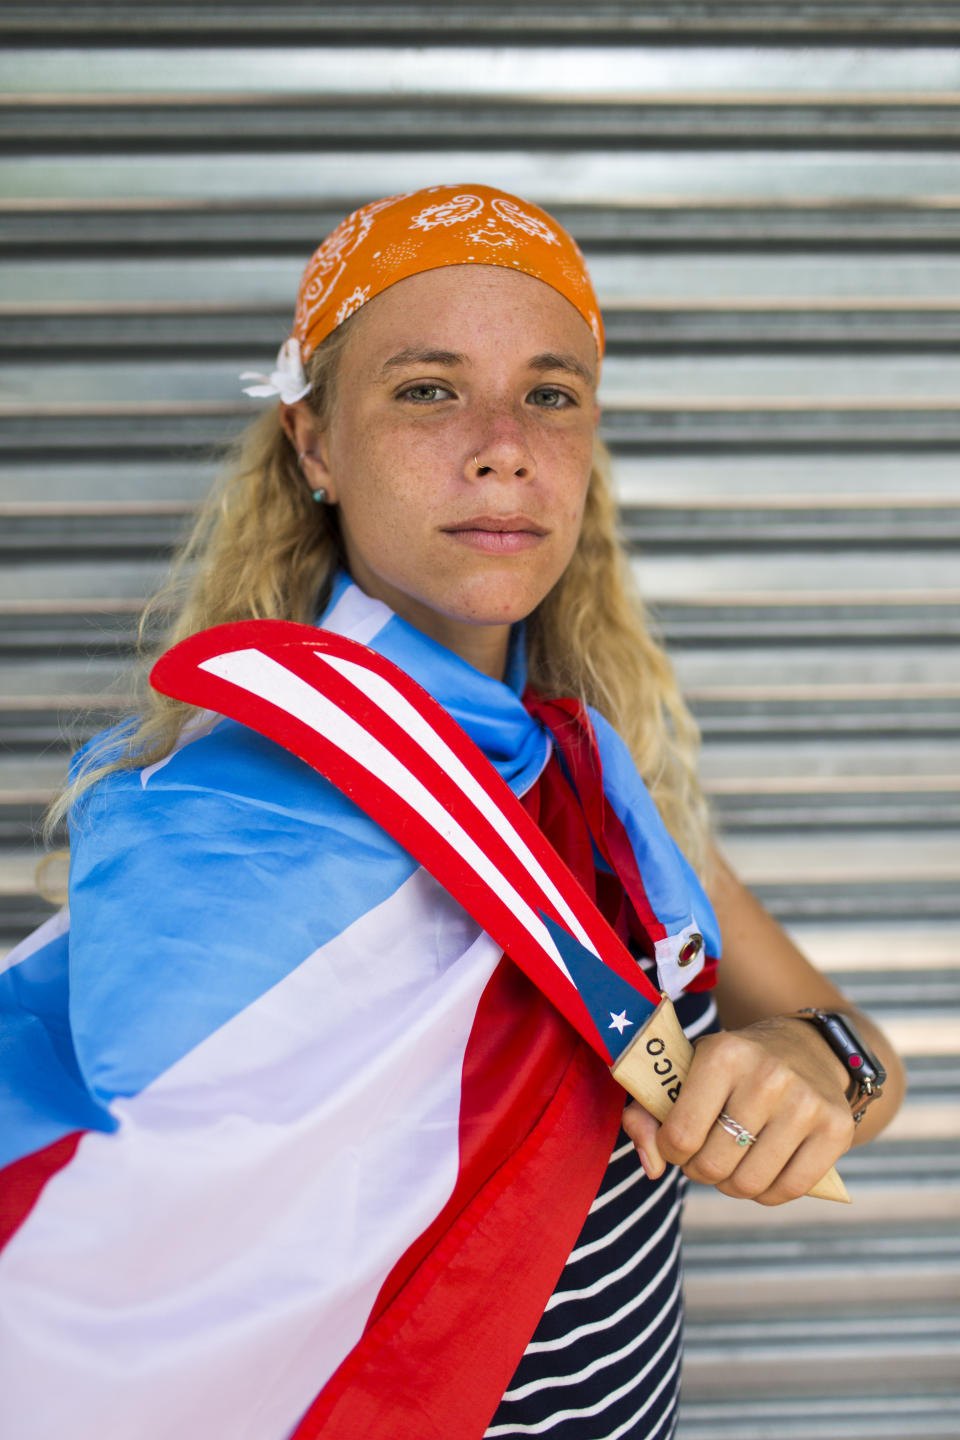 In this July 25, 2019 photo Paula Martinez poses for a portrait as people gather to celebrate the resignation of Gov. Ricardo Rossello after weeks of protests over leaked obscene, misogynistic online chats, in San Juan, Puerto Rico. The historic achievement was born out of a leaderless movement that relied heavily on social media, the appearance of music stars including Ricky Martin, Residente and Bad Bunny and an angry populace fed up with corruption. (AP Photo/Dennis M. Rivera Pichardo)